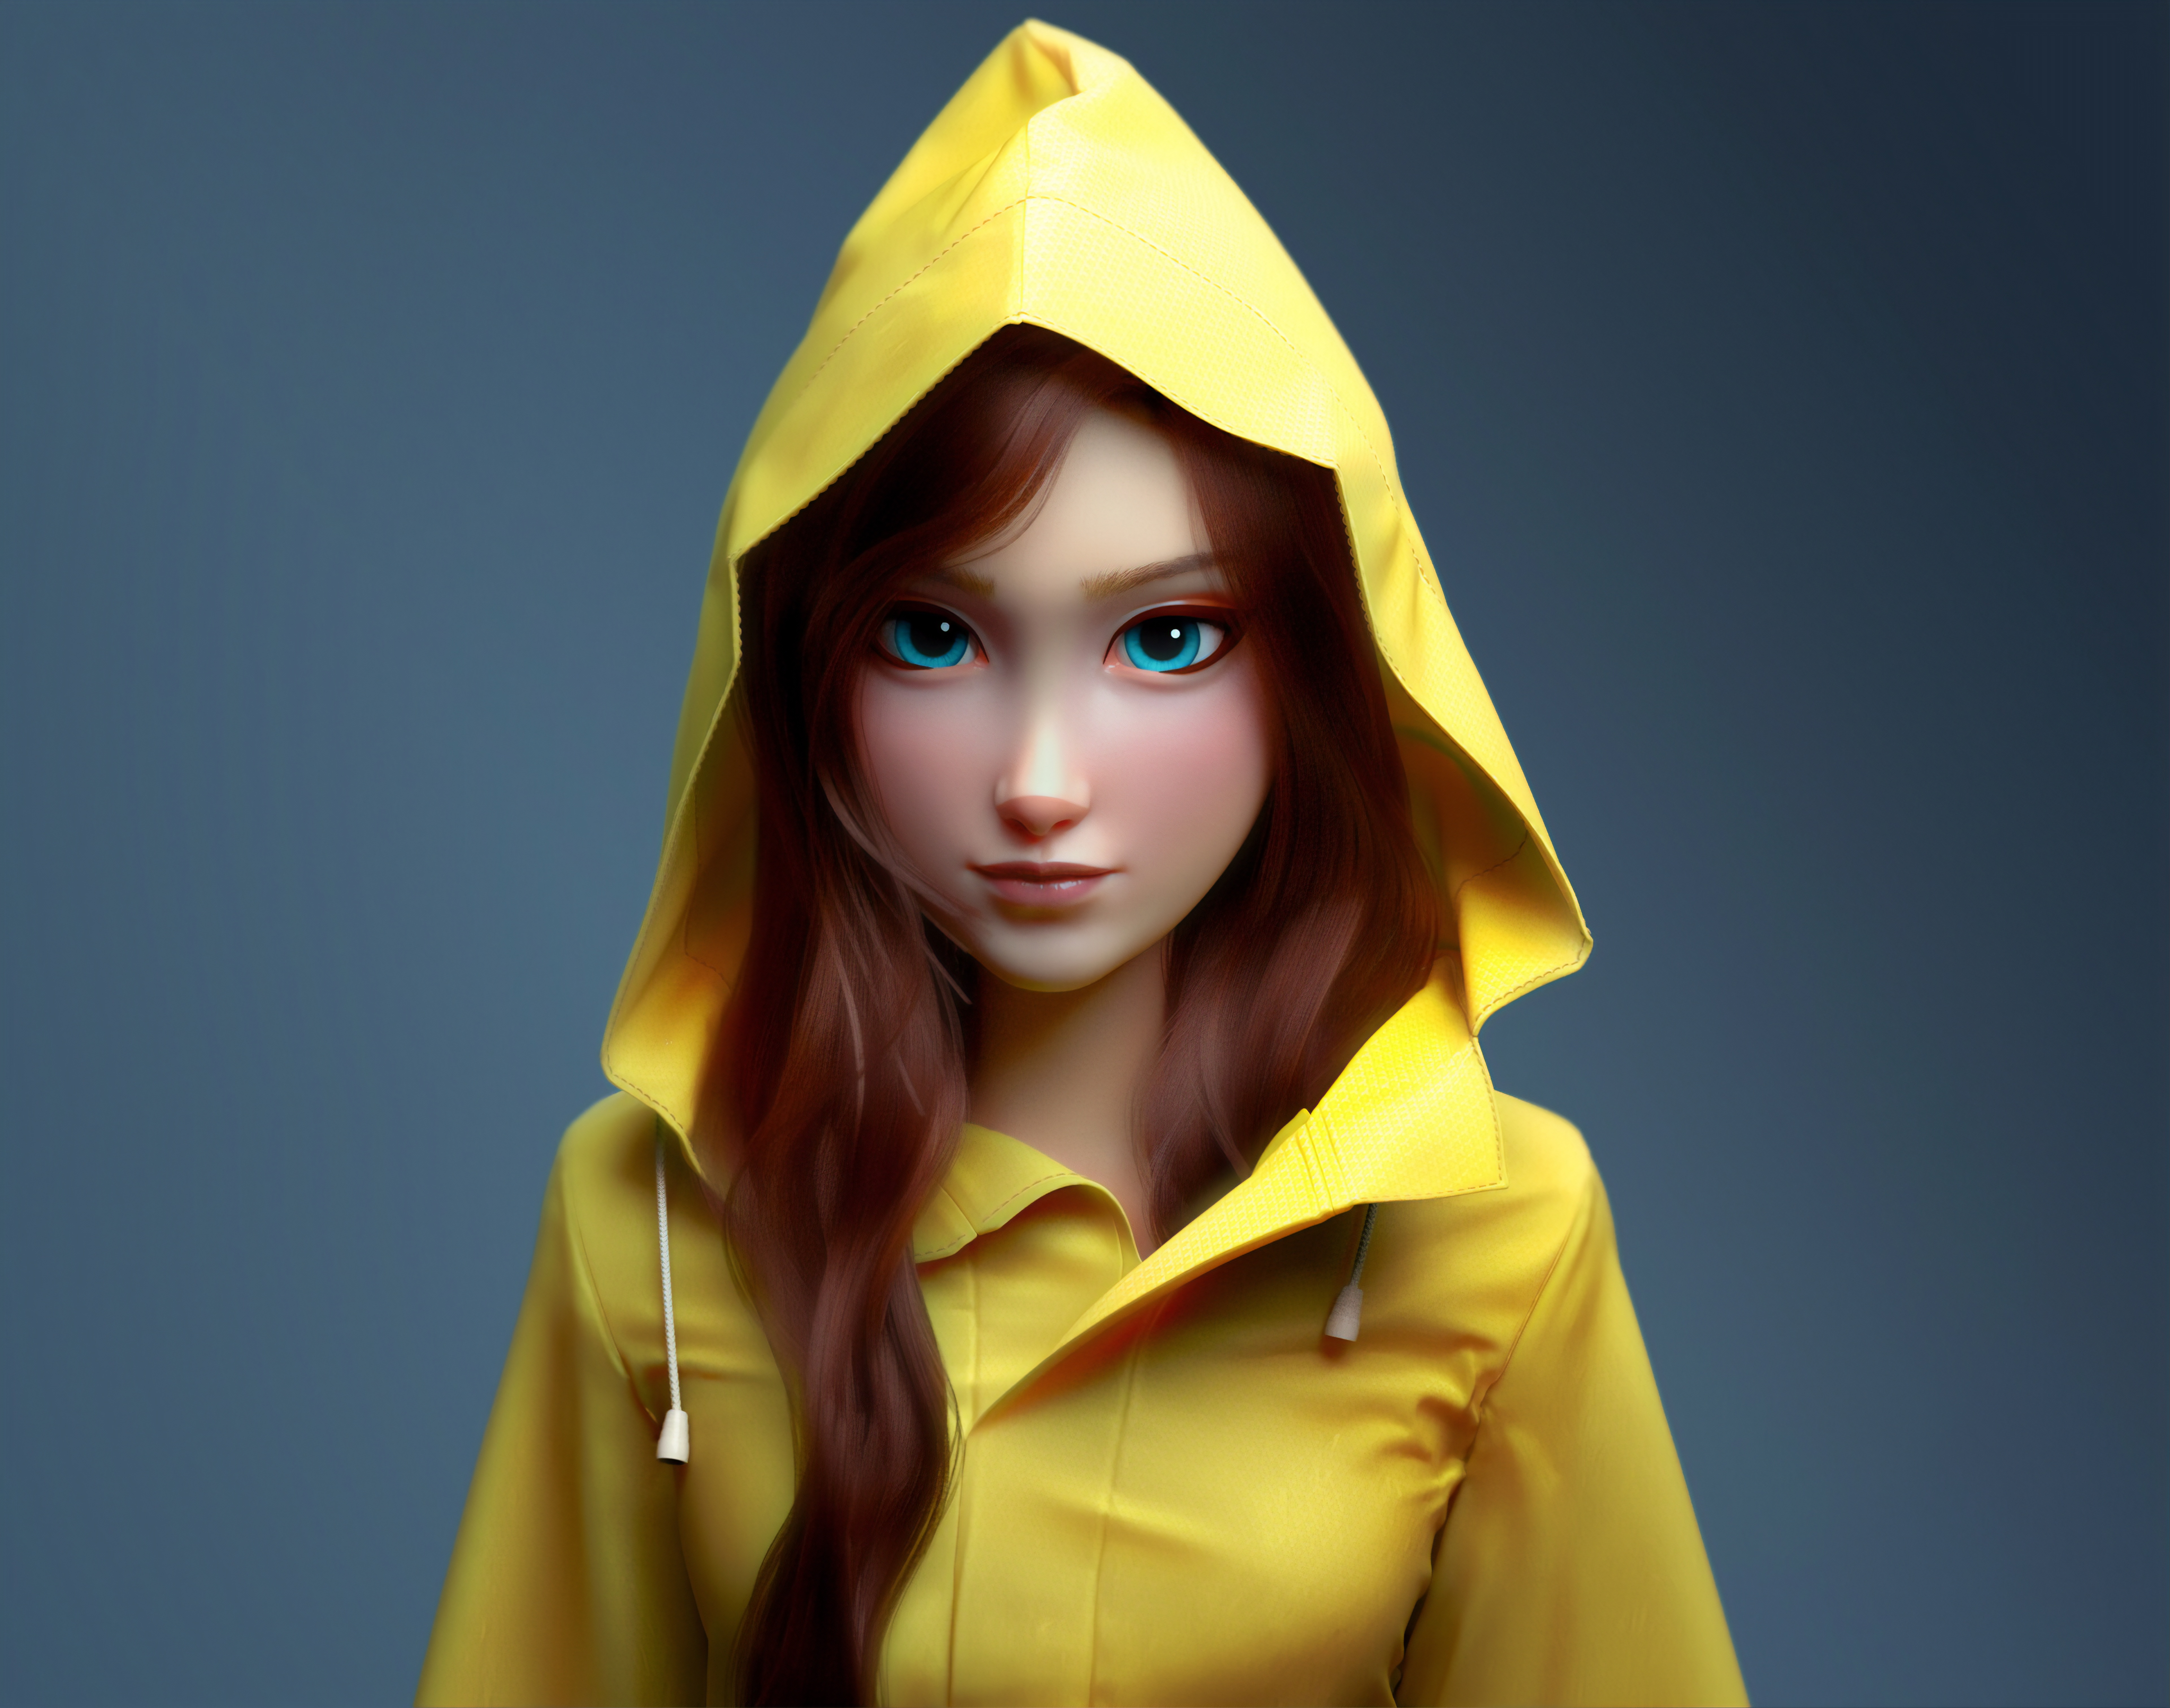 7680x4320 3d Cgi Girl Art 8k HD 4k Wallpapers, Images, Backgrounds, Photos  and Pictures